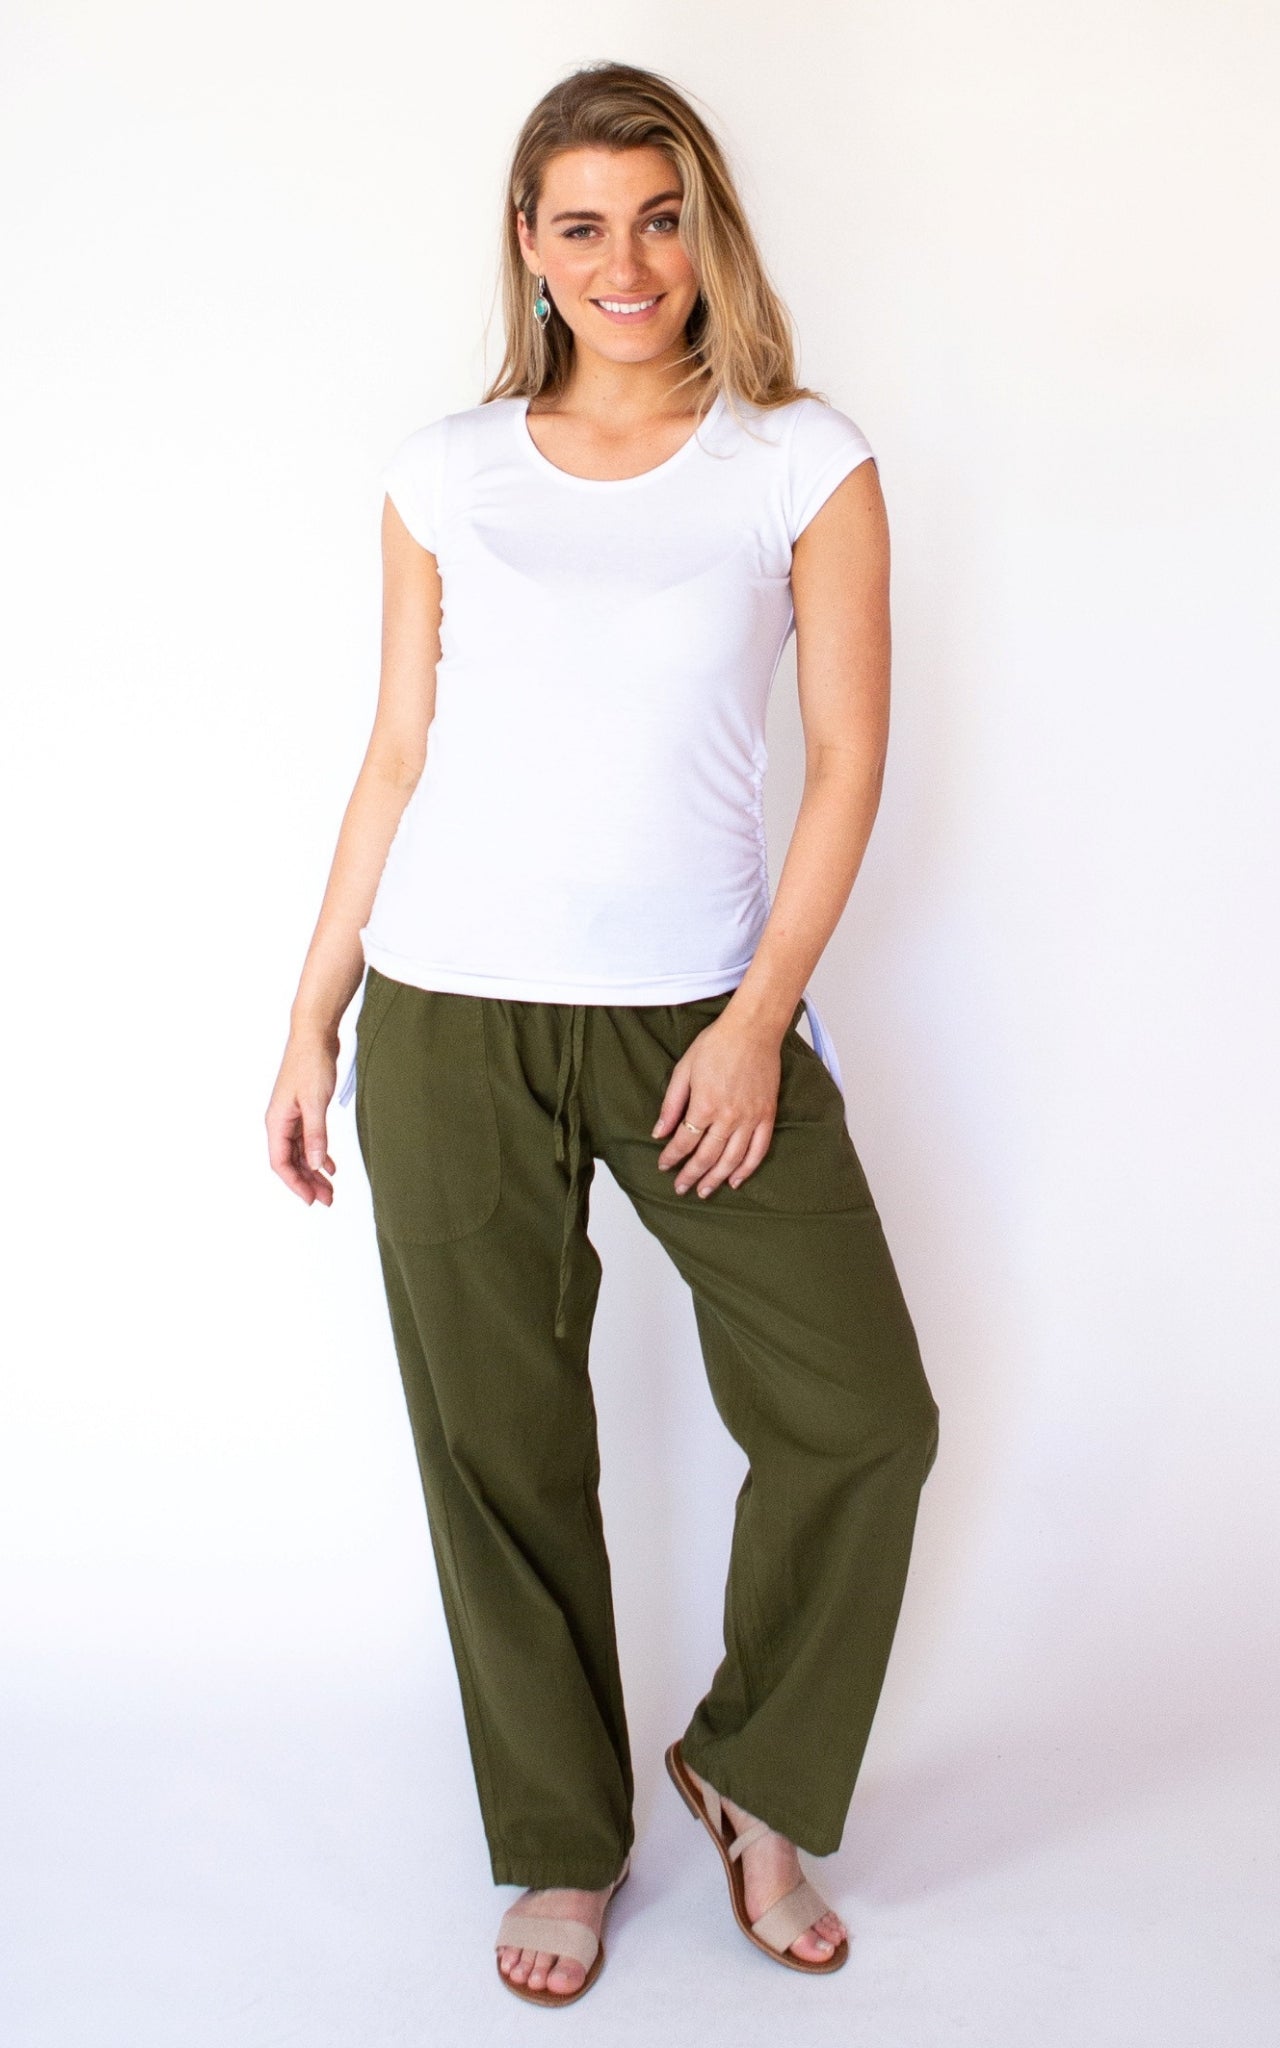 Surya Australia Ethical Cotton Loose Pants from Nepal - Green